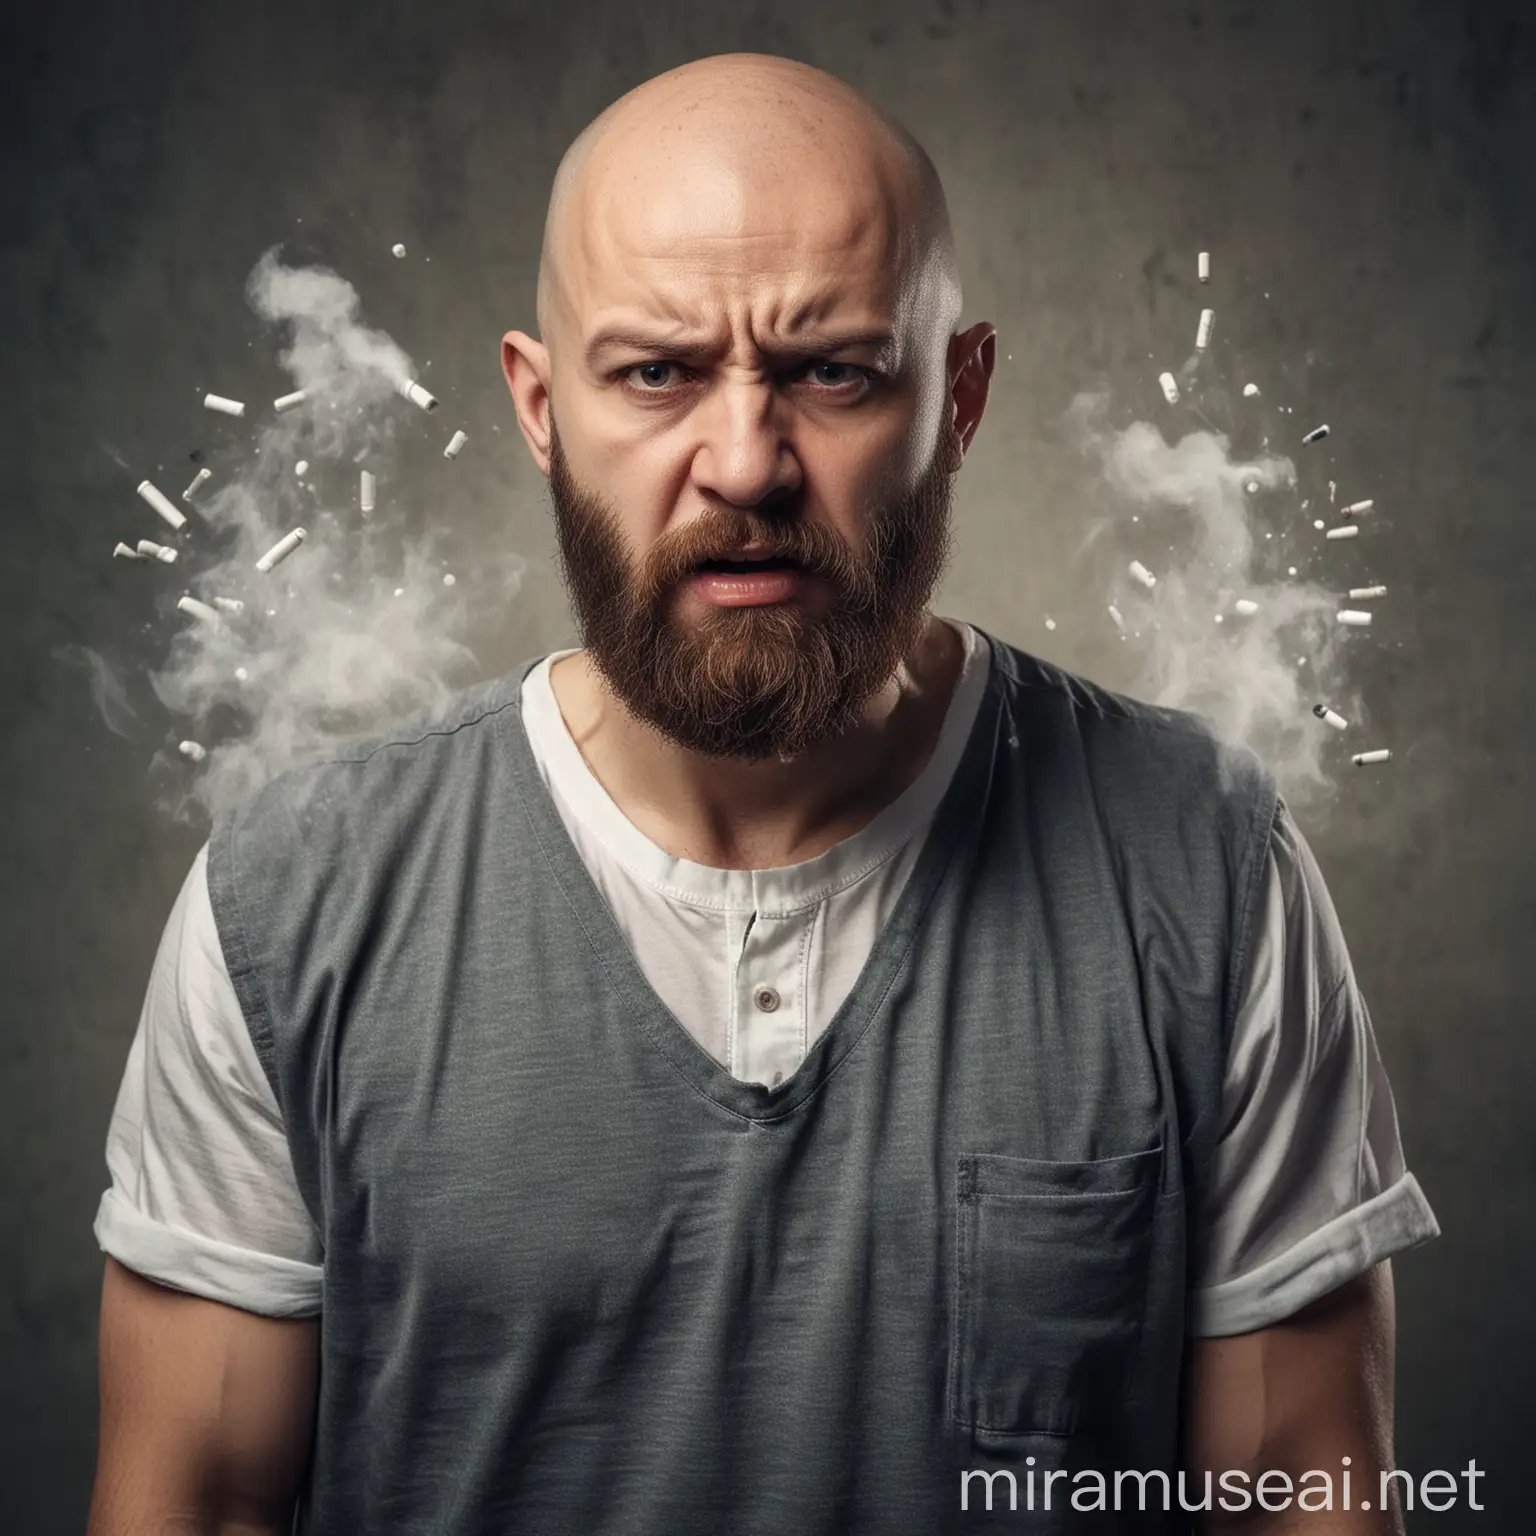 Angry Bald Man Confronts Drug Abuse